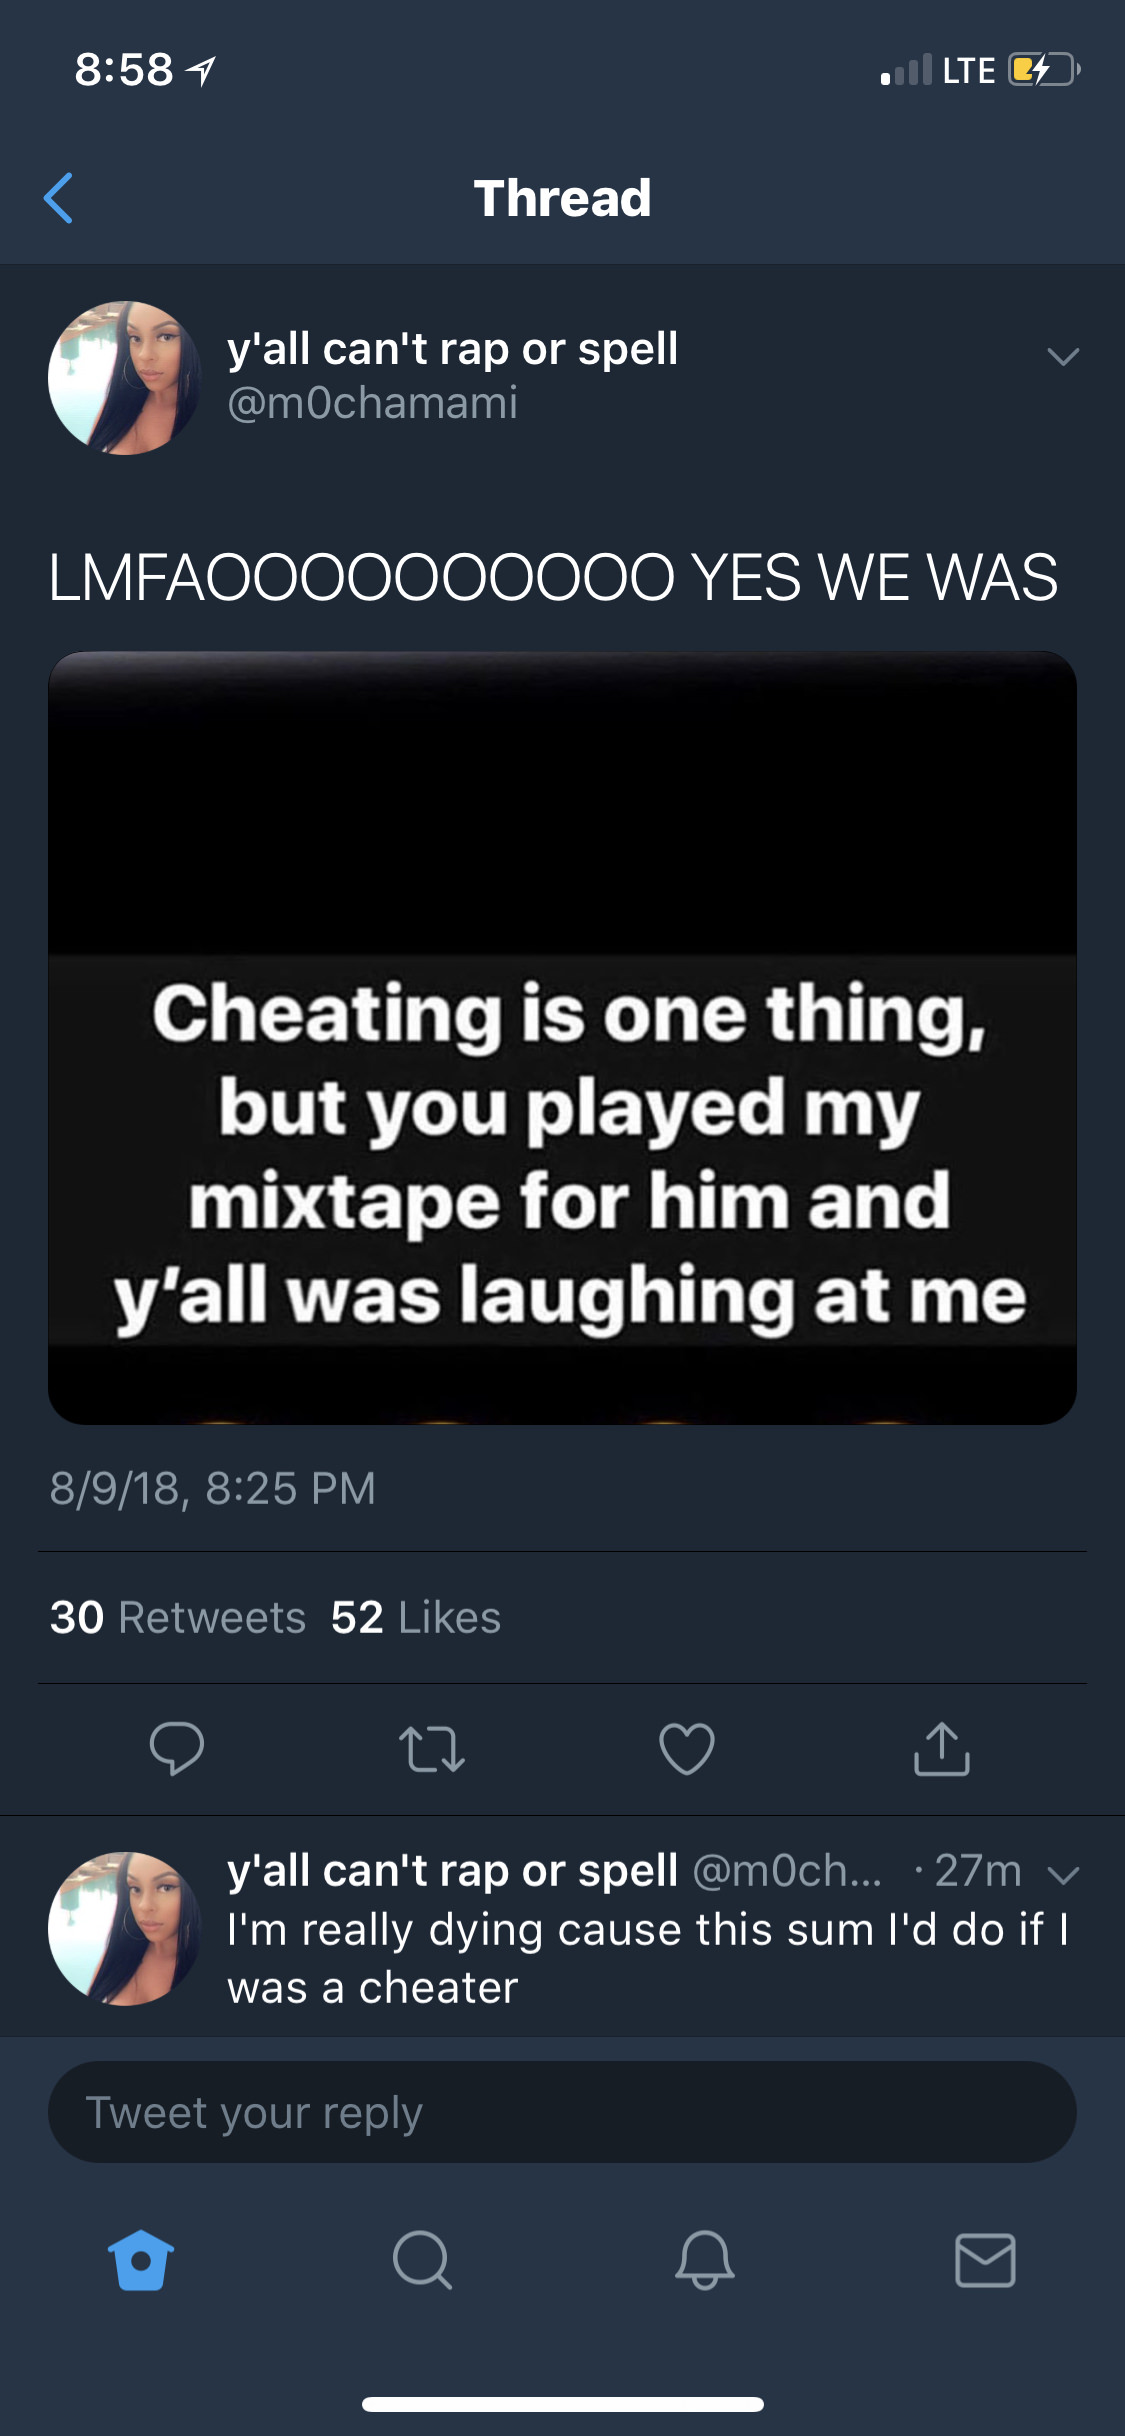 screenshot - || Lte C Thread y'all can't rap or spell LMFAO000000000 Yes We Was Cheating is one thing, but you played my mixtape for him and y'all was laughing at me 8918, 30 52 y'all can't rap or spell ... 27m v I'm really dying cause this sum I'd do if 